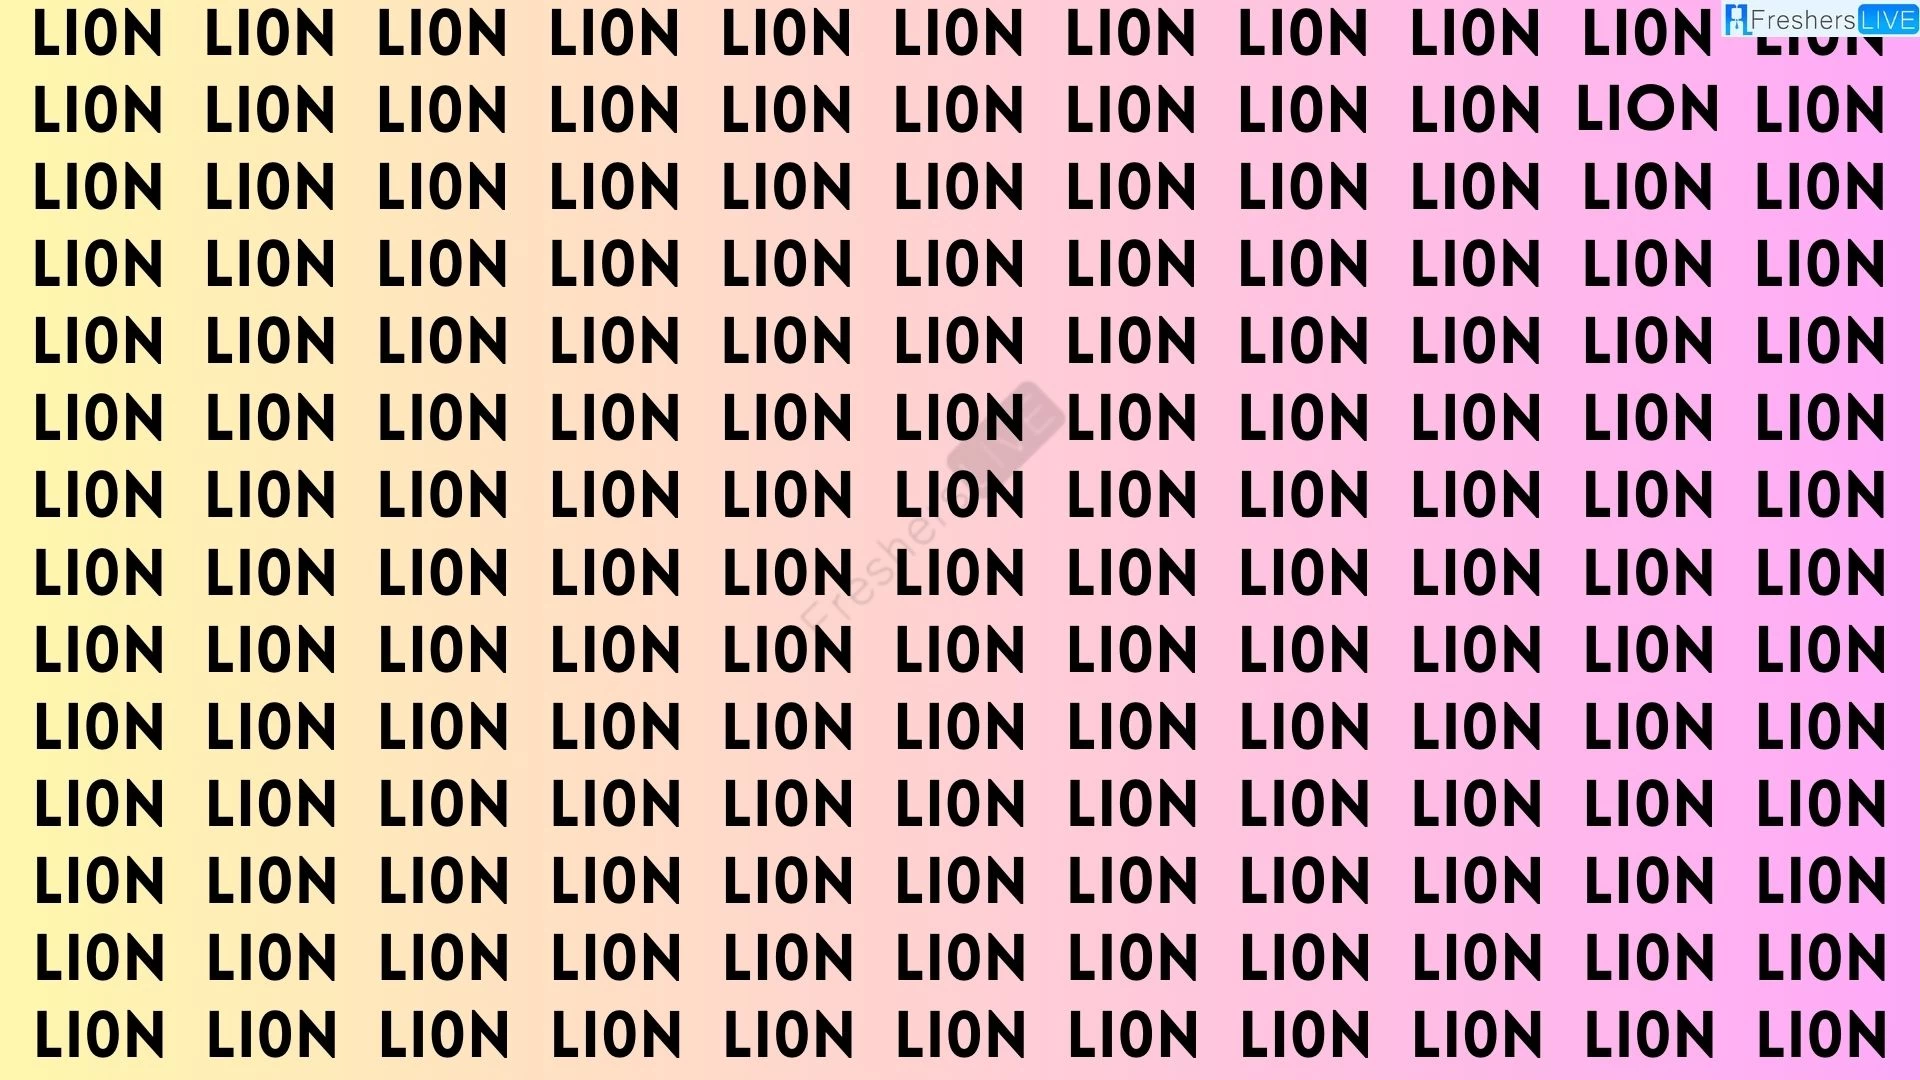 You have 50/50 vision if you can find the Word Lion in 10 seconds